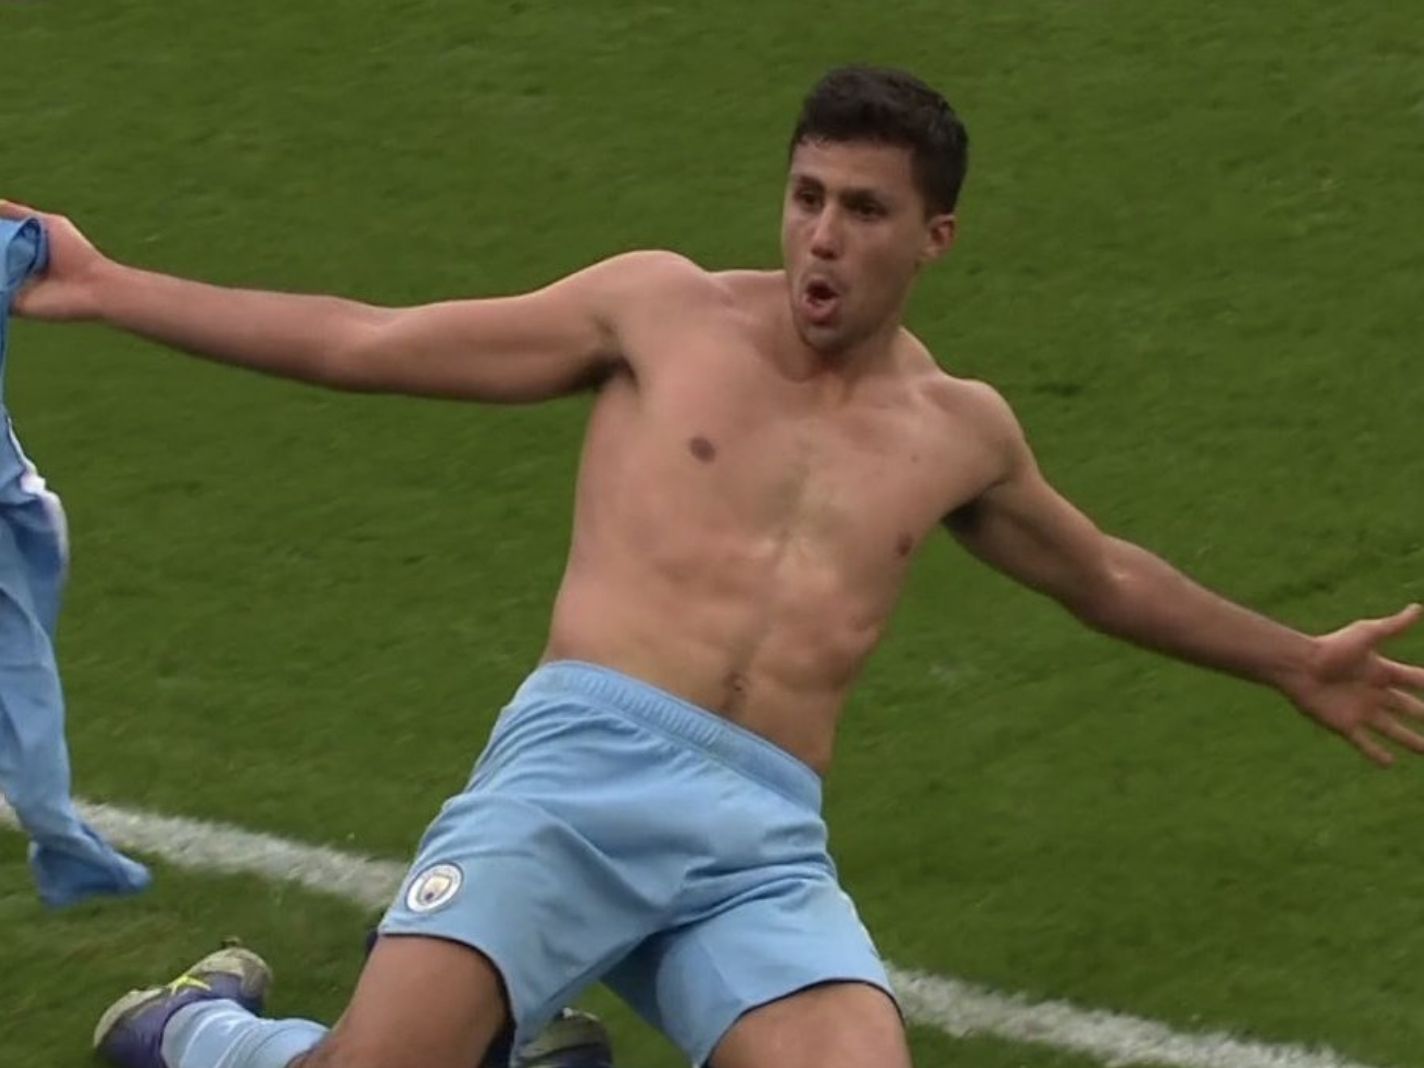 Rodri takes off his shirt during wild celebration in front of Arsenal fans